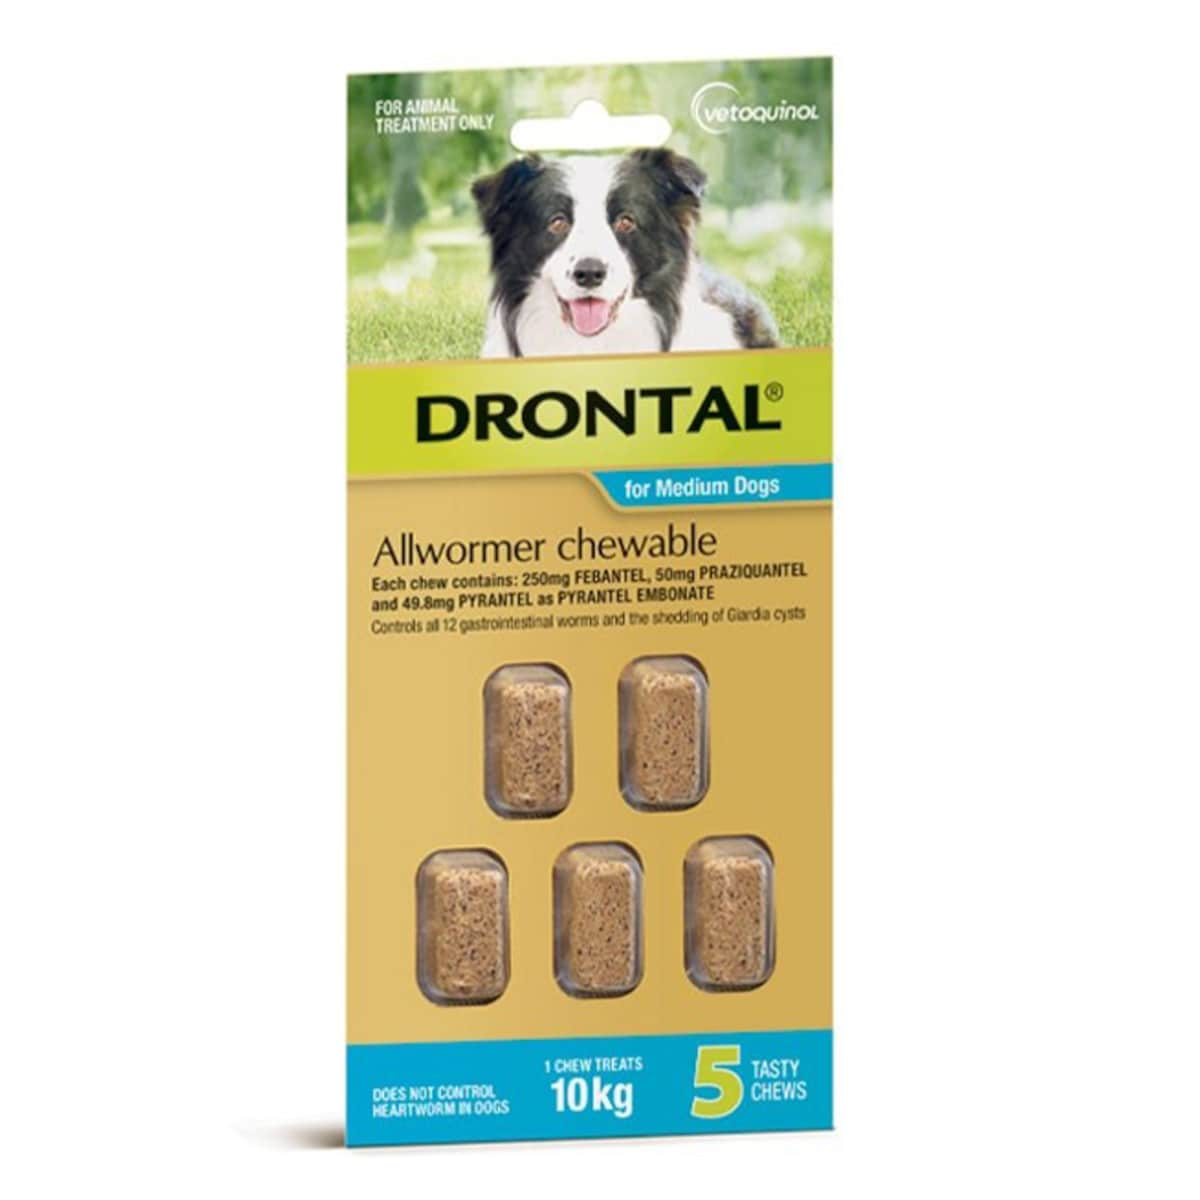 Drontal Allwormer Chewable for Medium Dogs 5 Chews